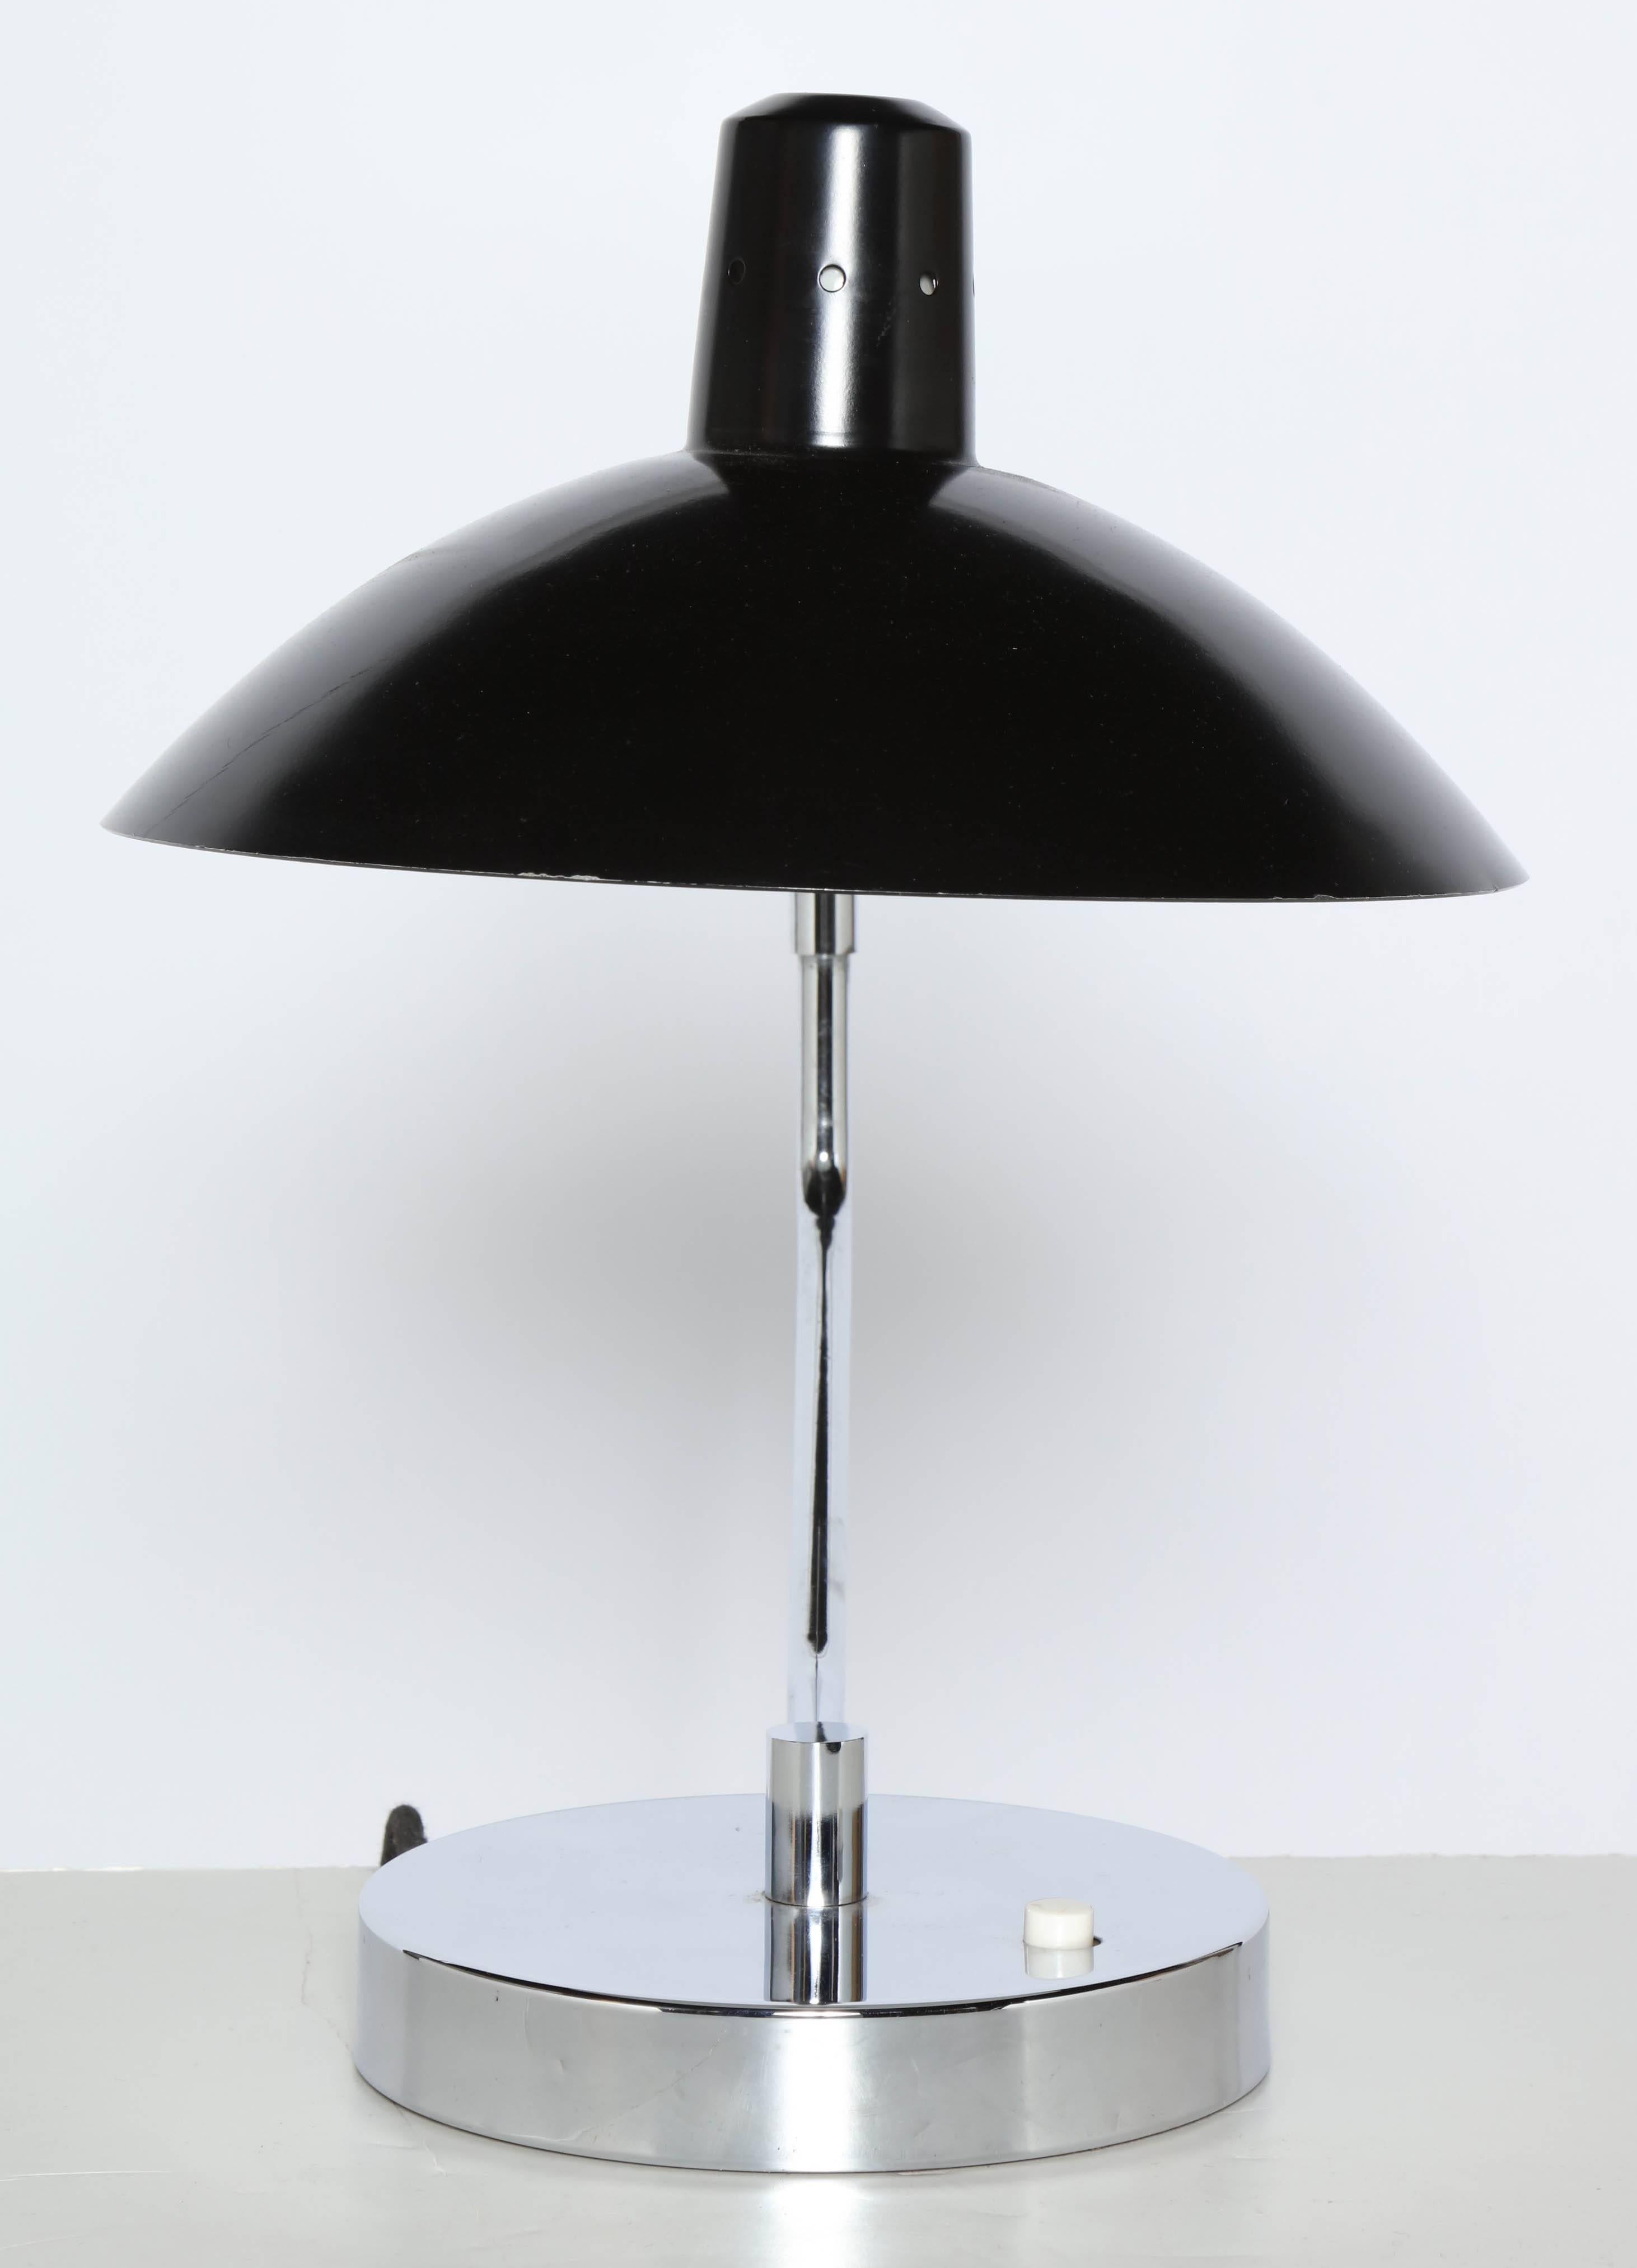 Classic Clay Michie for Knoll International Articulating No. 8 Table Lamp designed in 1958. Featuring a Chrome swing arm, perforated black enamel shade with (7.5D x 1.5H) weighted Chrome base. Adjustable hood and arm. Very fine condition. Modern.